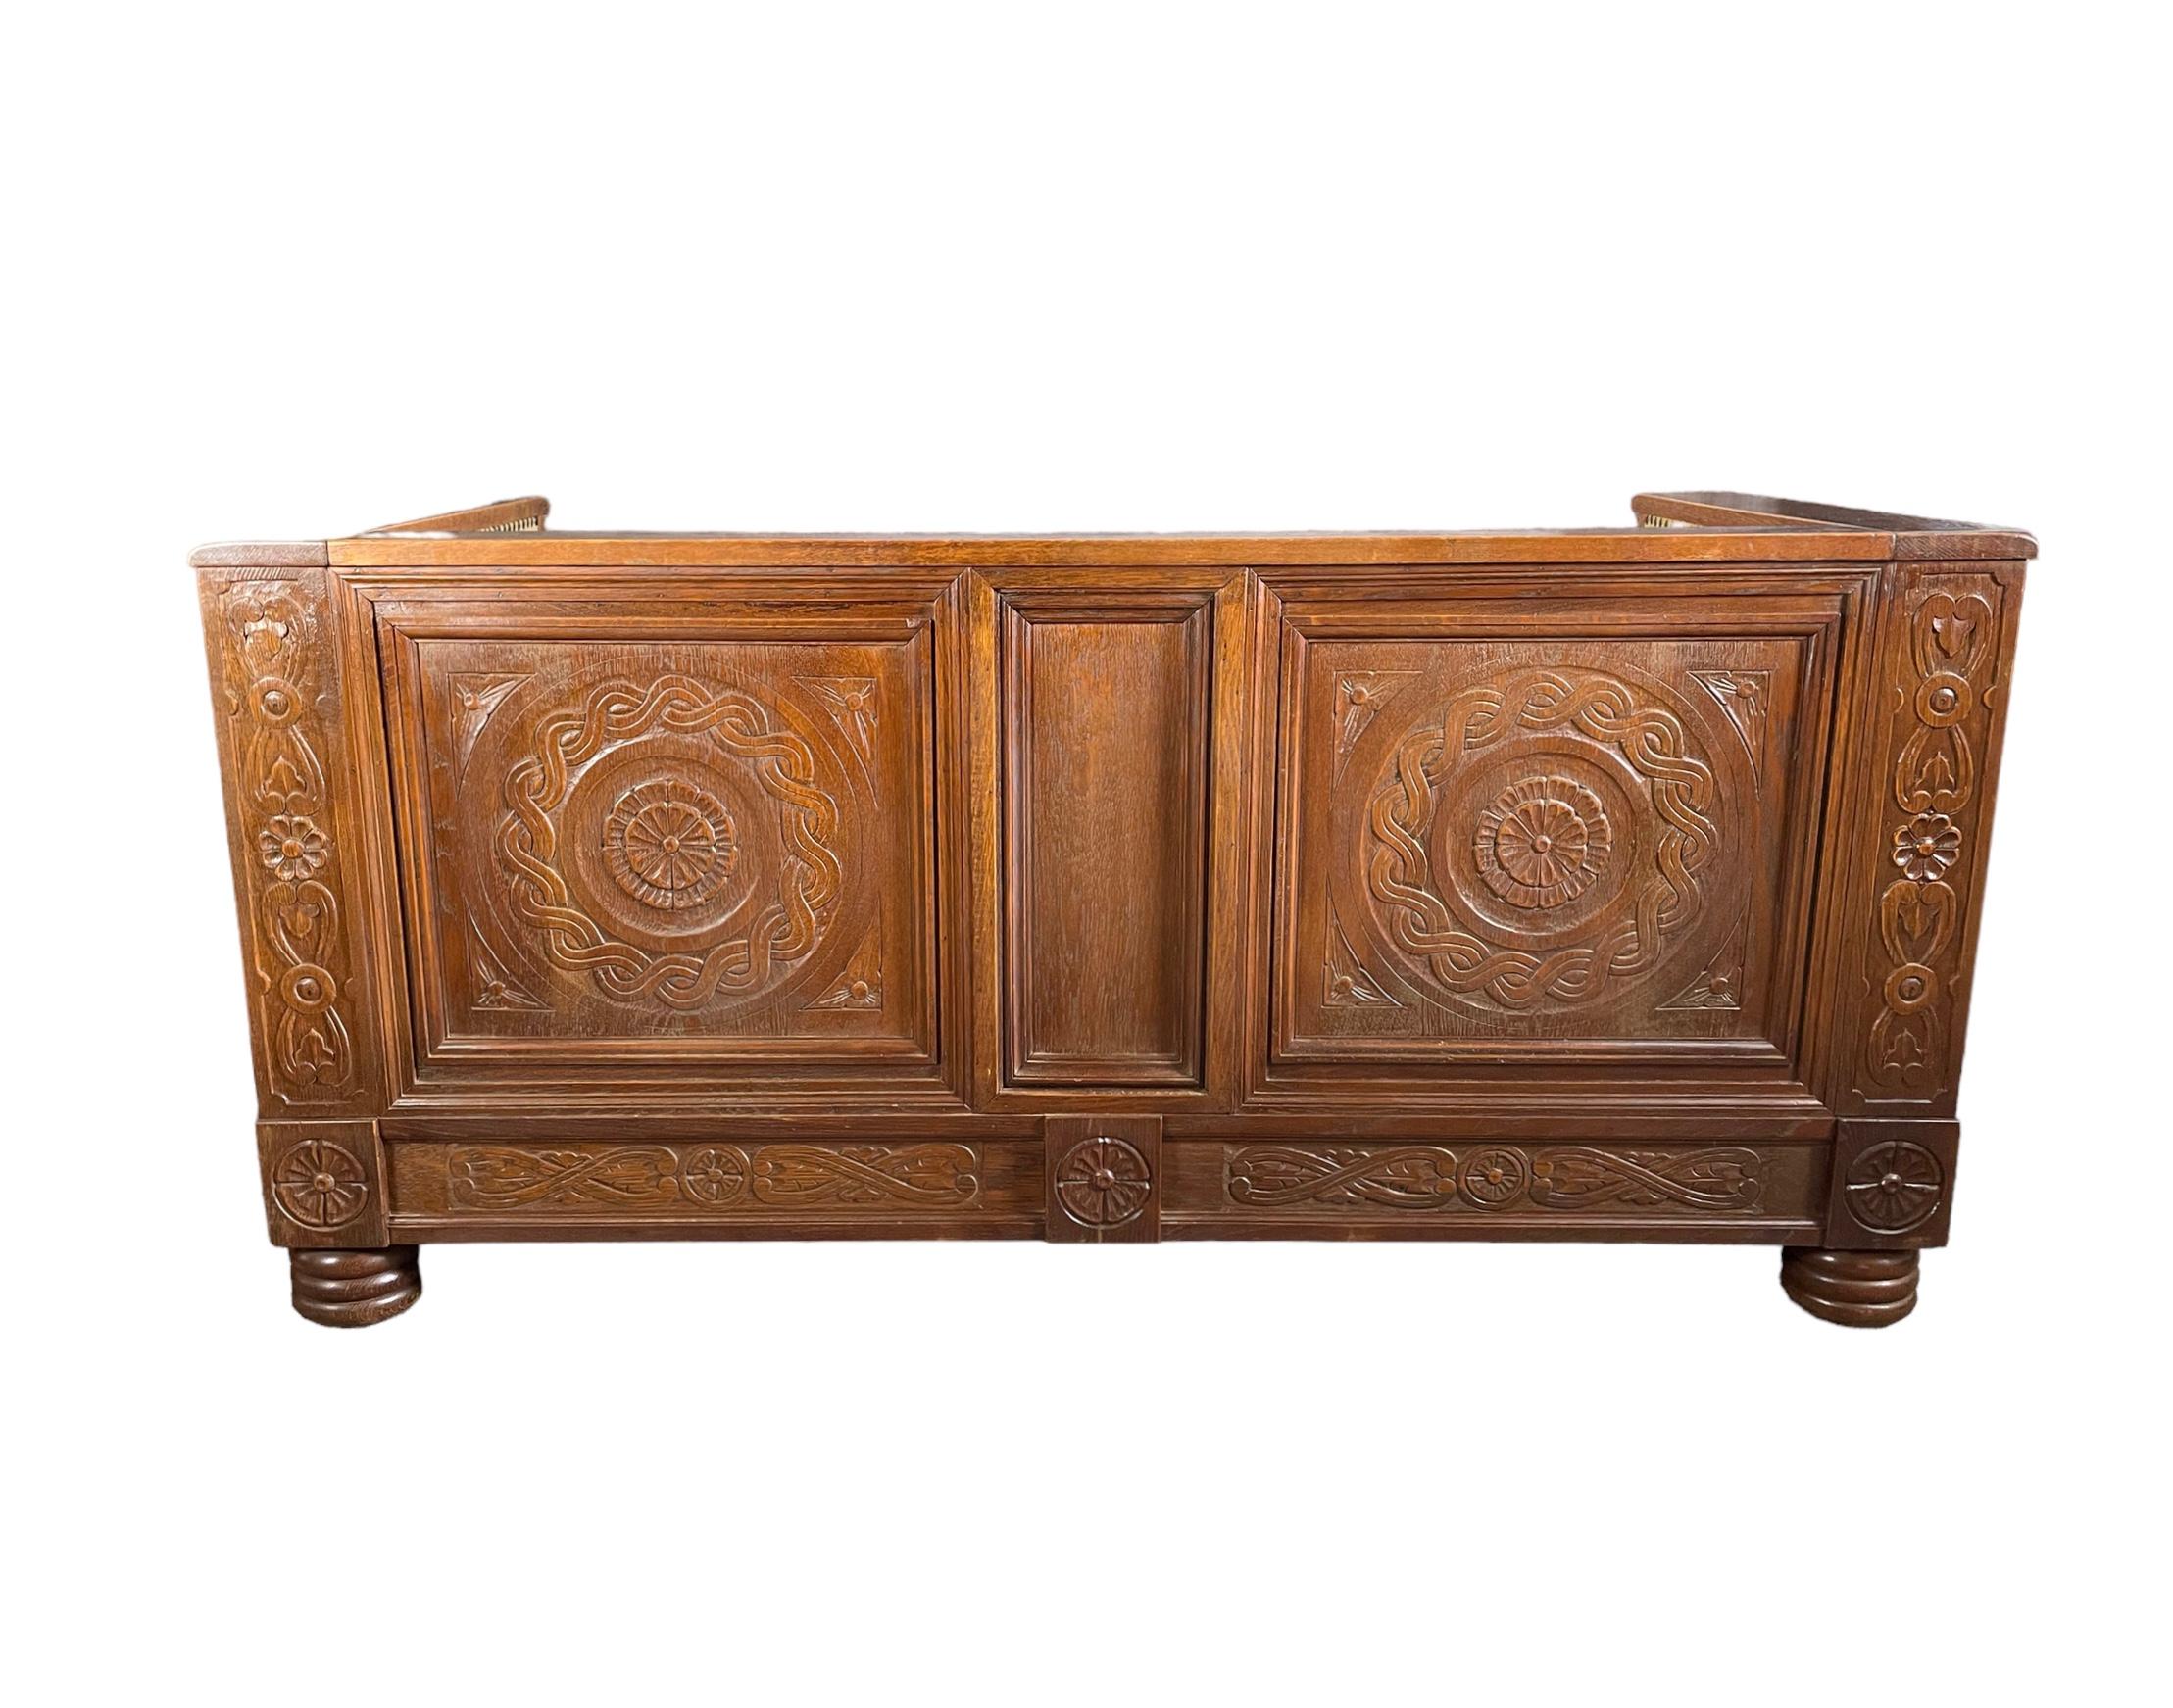 Arts & Crafts oak settle, with detailed carving to the front arms, the sides and back. The black wrought iron handles to each end, sturdy enough to lift this very heavy, solid piece. The spring base, still in excellent condition. 
A piece of